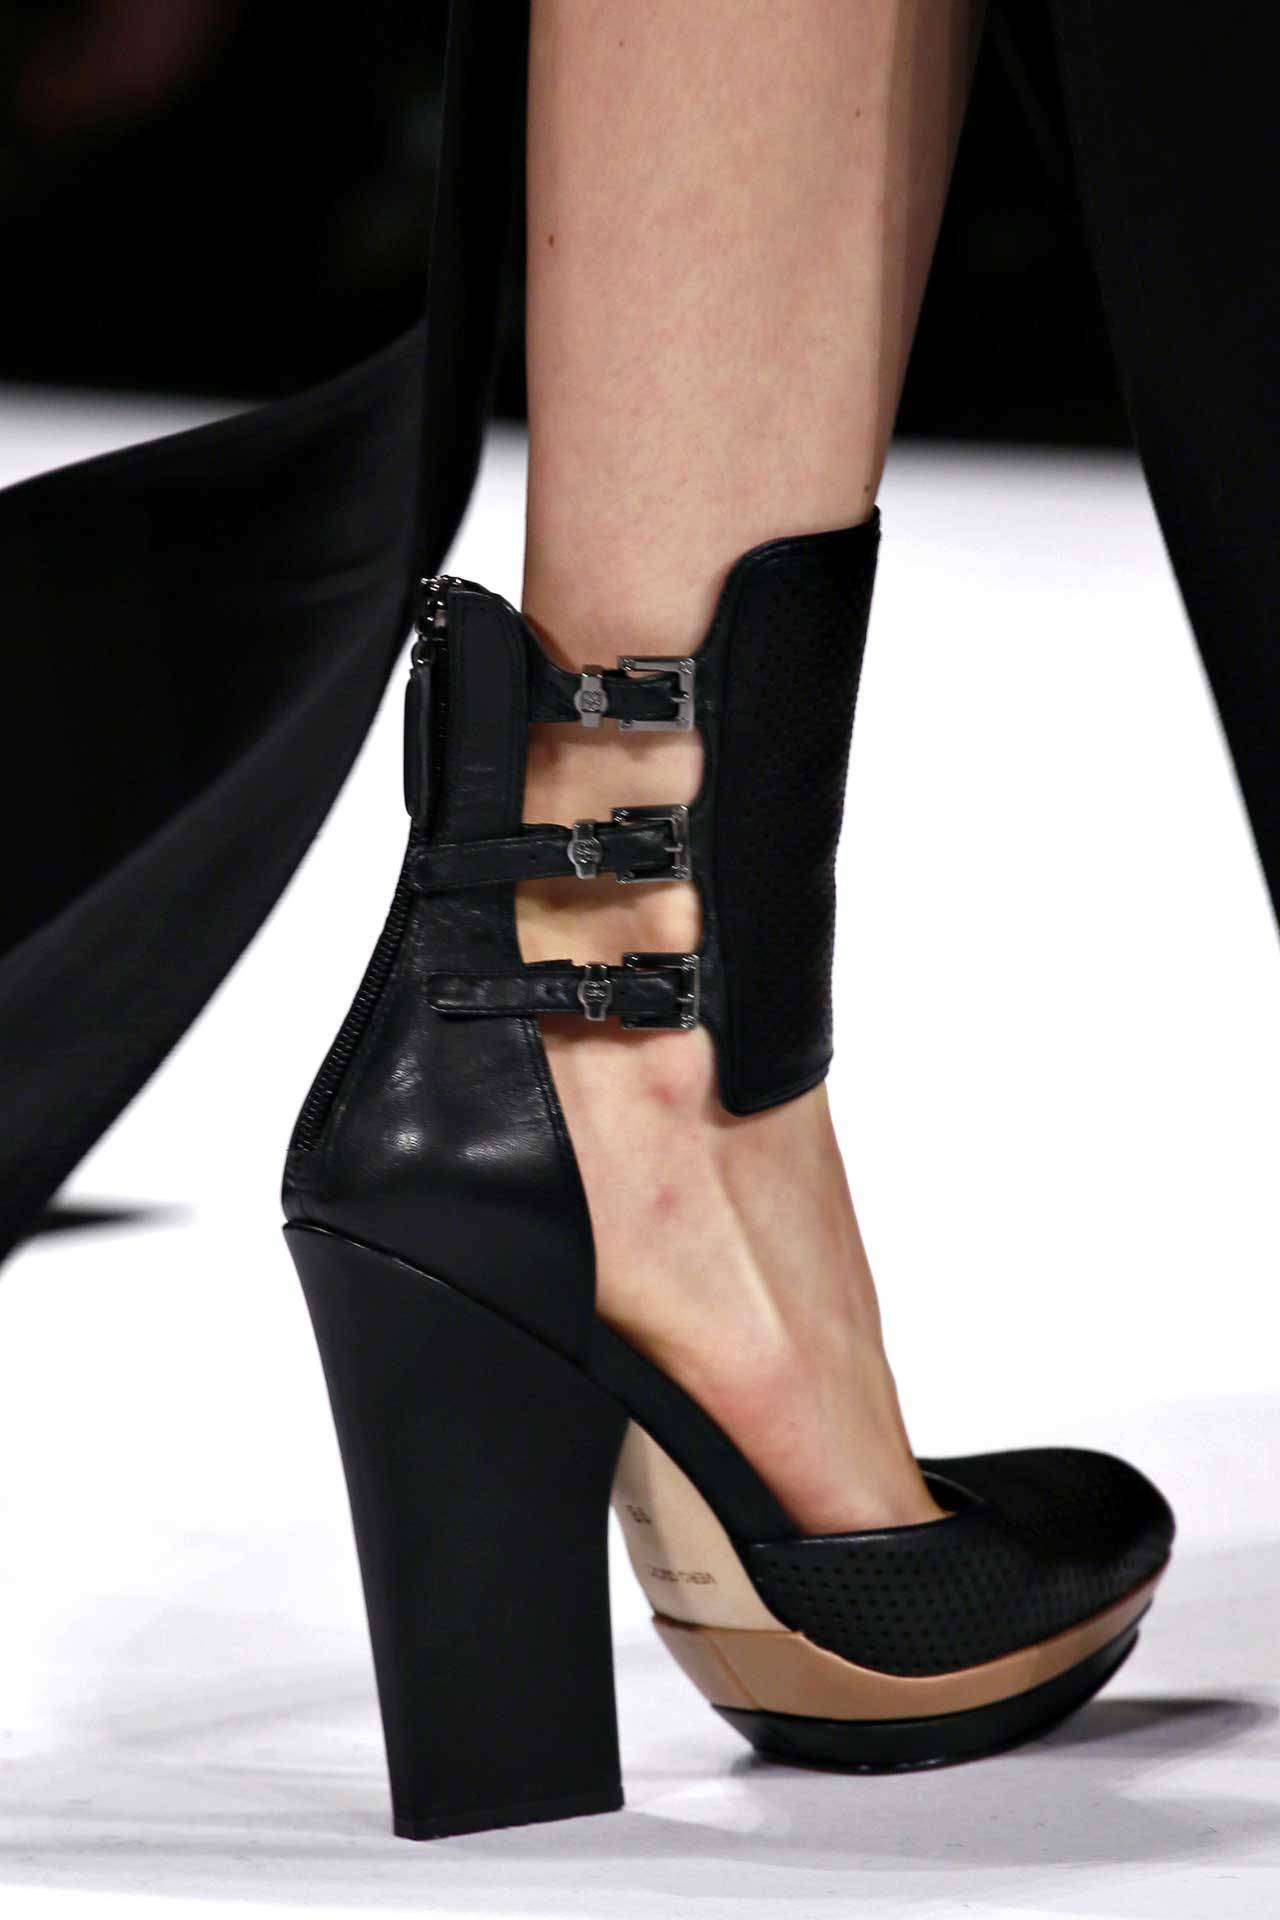 I'd like another view of these | Heels, Max azria, Peep toe